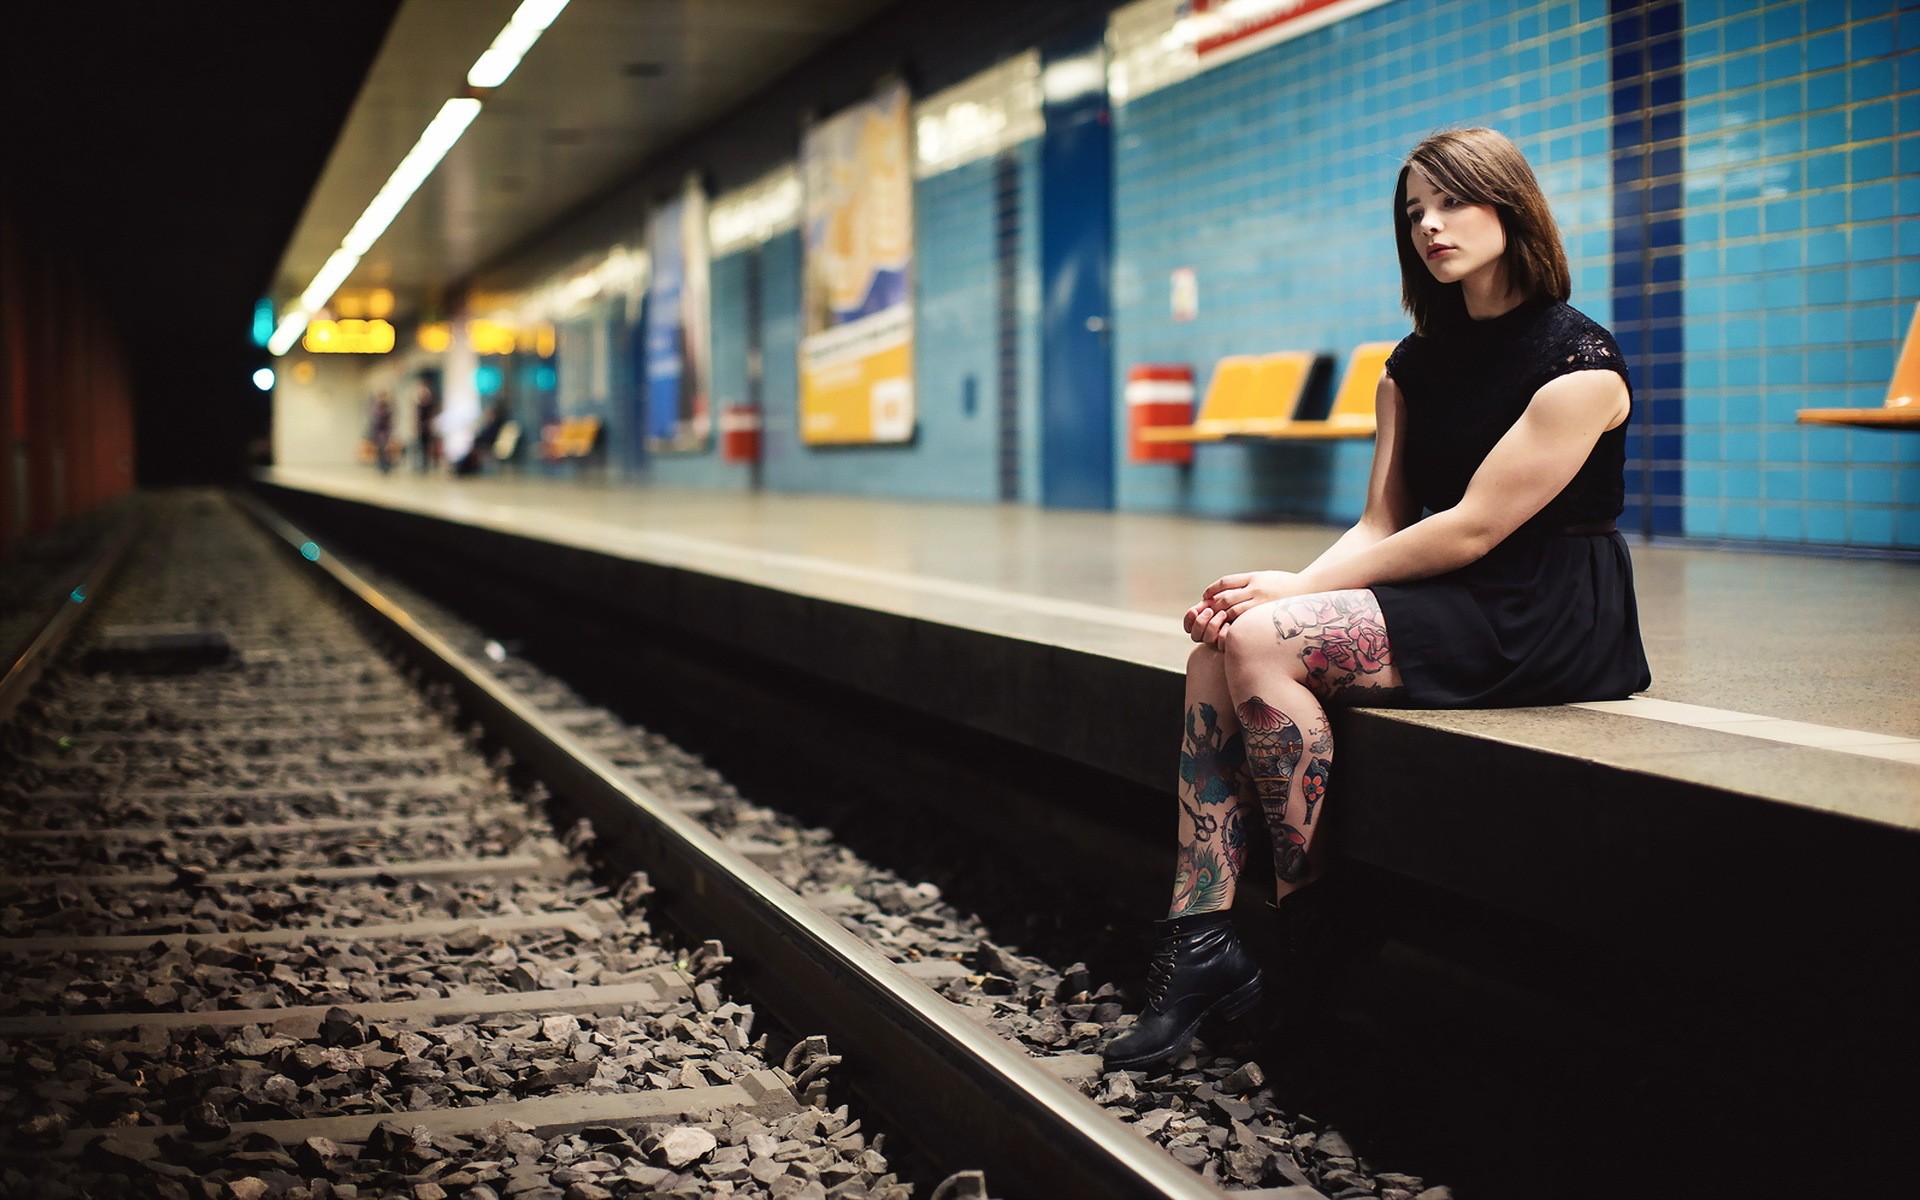 train station subway waiting tattoo sitting julia underground railway chair brunette coldfront transport looking introvert vehicle wallpapers